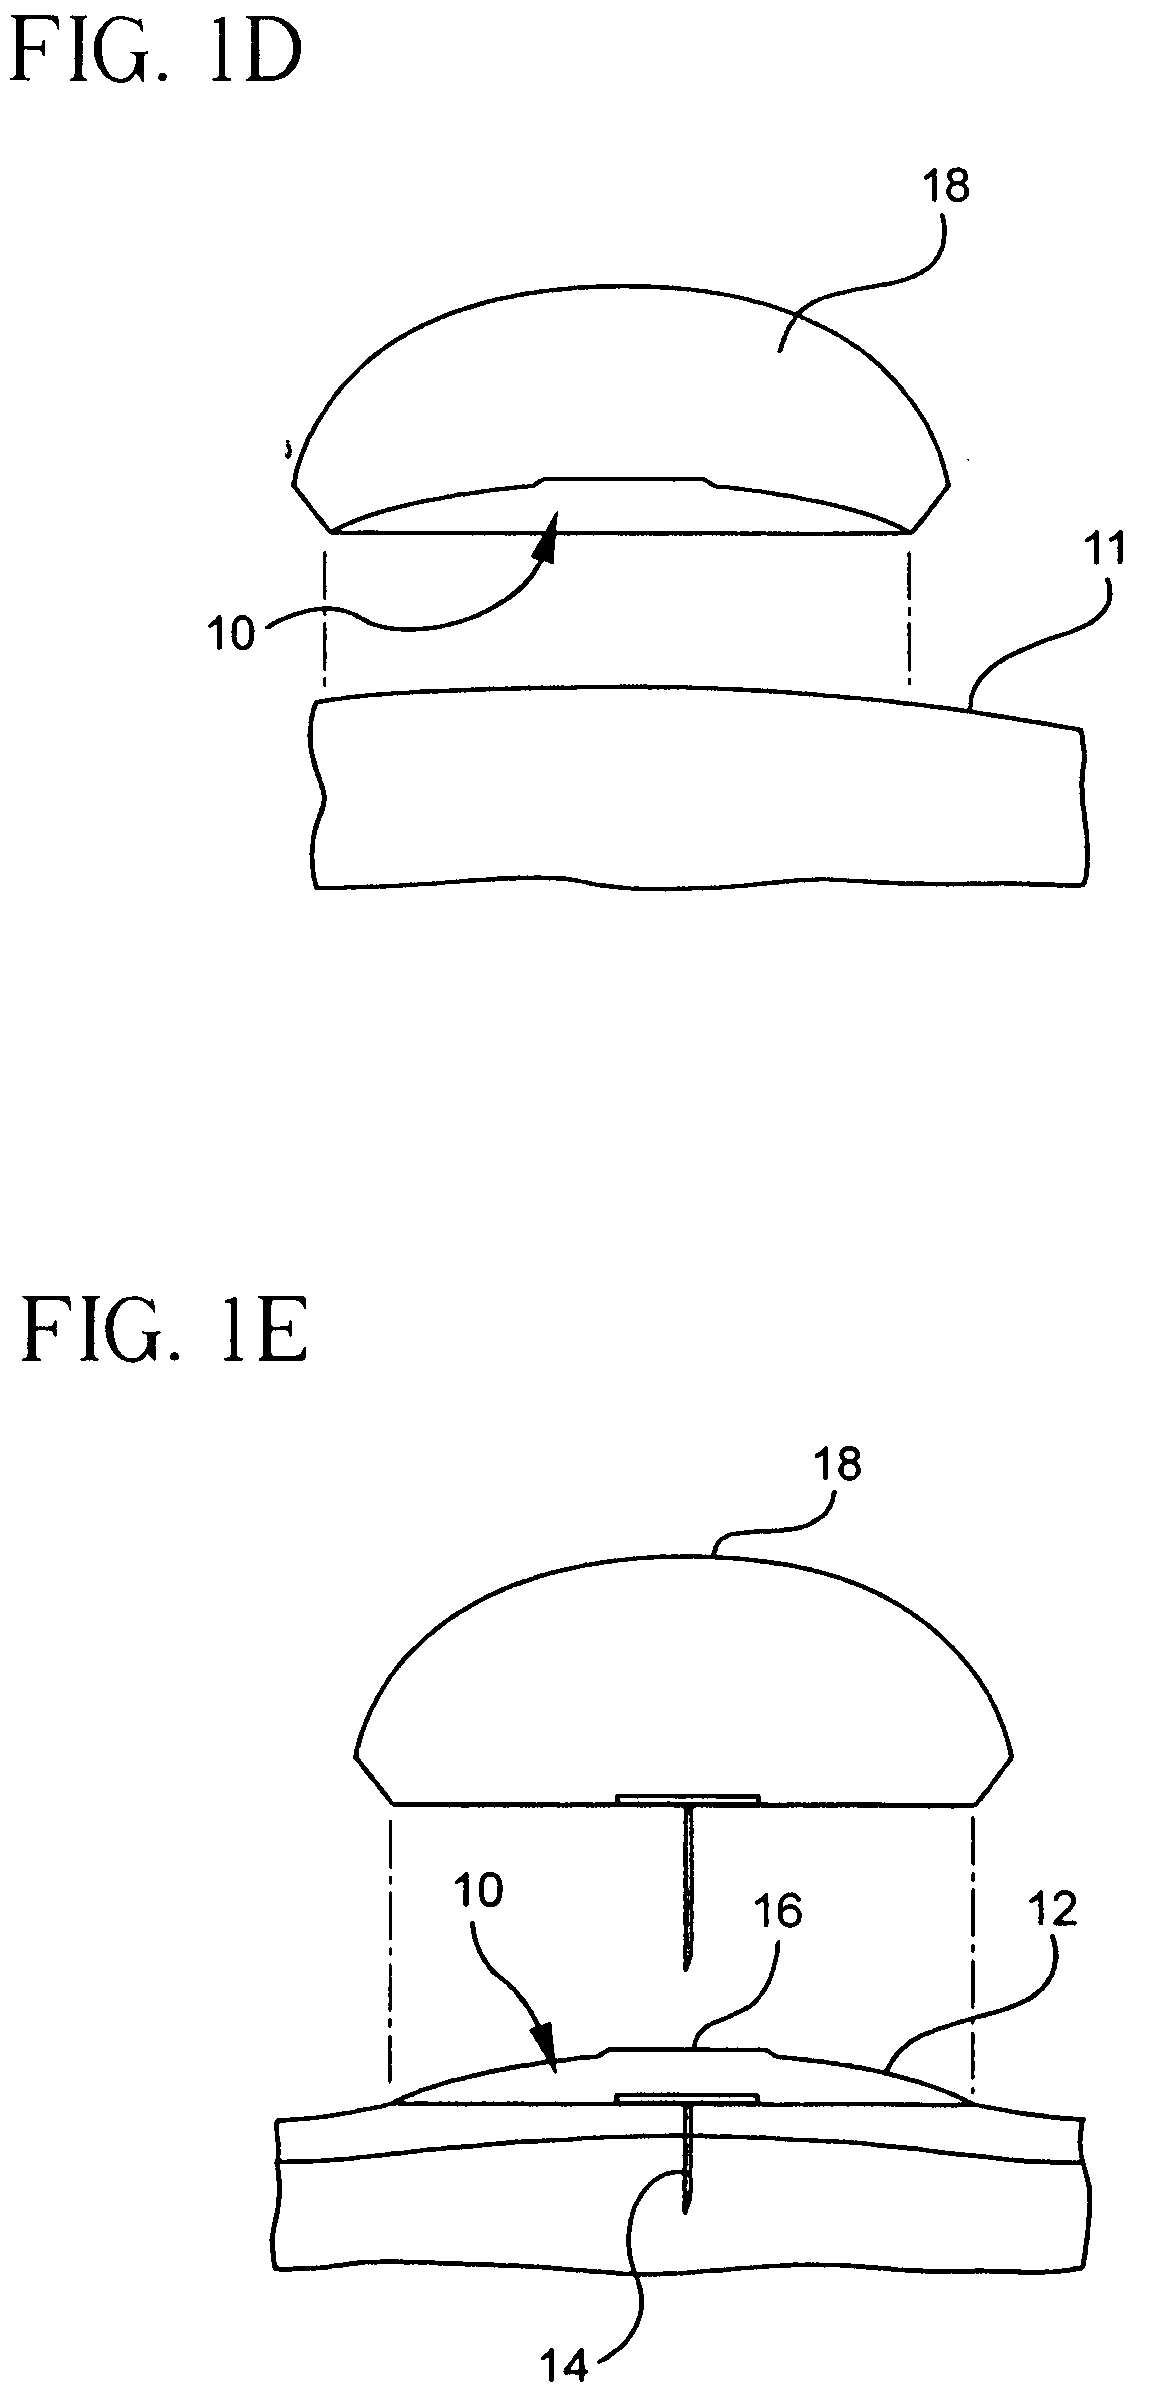 Method And Apparatus For Delivering A Therapeutic Substance Through An Injection Port